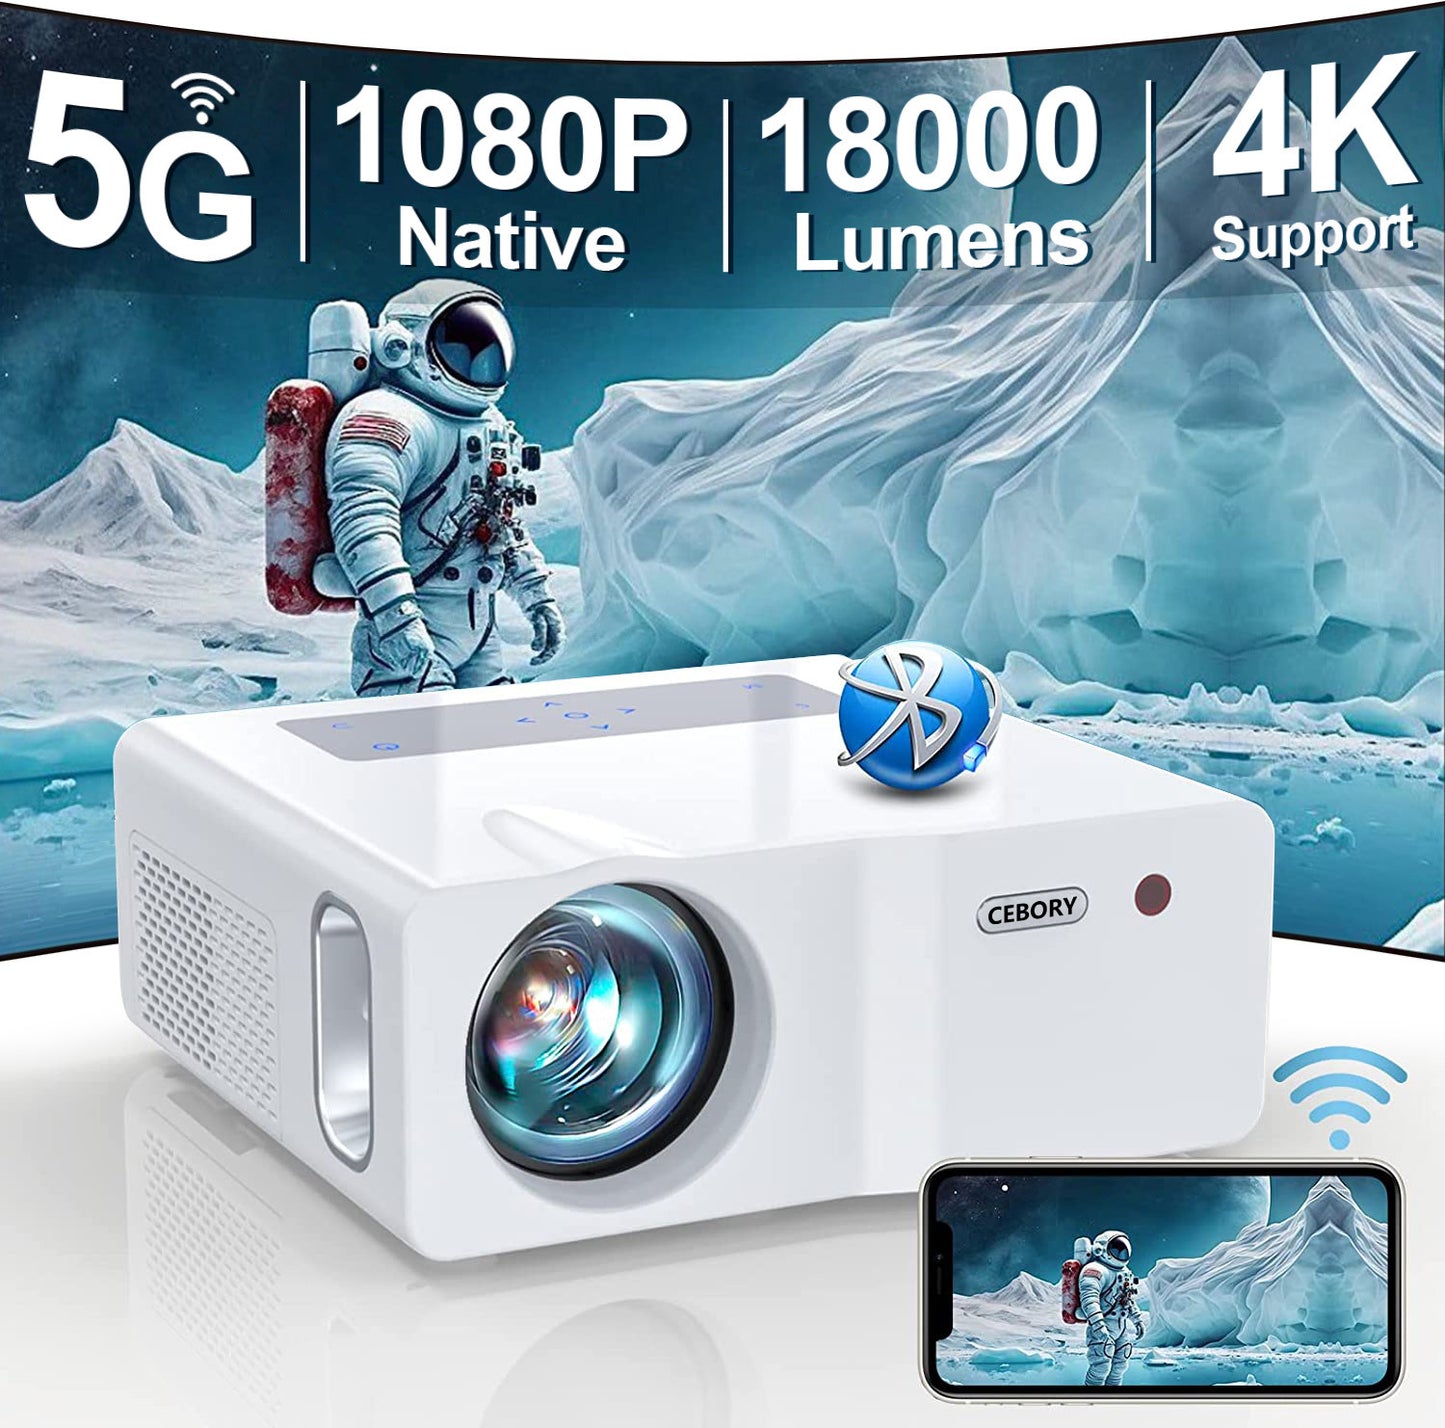 Native 1080P 5G WiFi Bluetooth Projector,18000LM 450 ANSI Outdoor Movie Projector 4K Support and Max 450" Display, LED Home Theater Video Projector Compatible with iOS/Android/Win/TV Stick/PS5 White